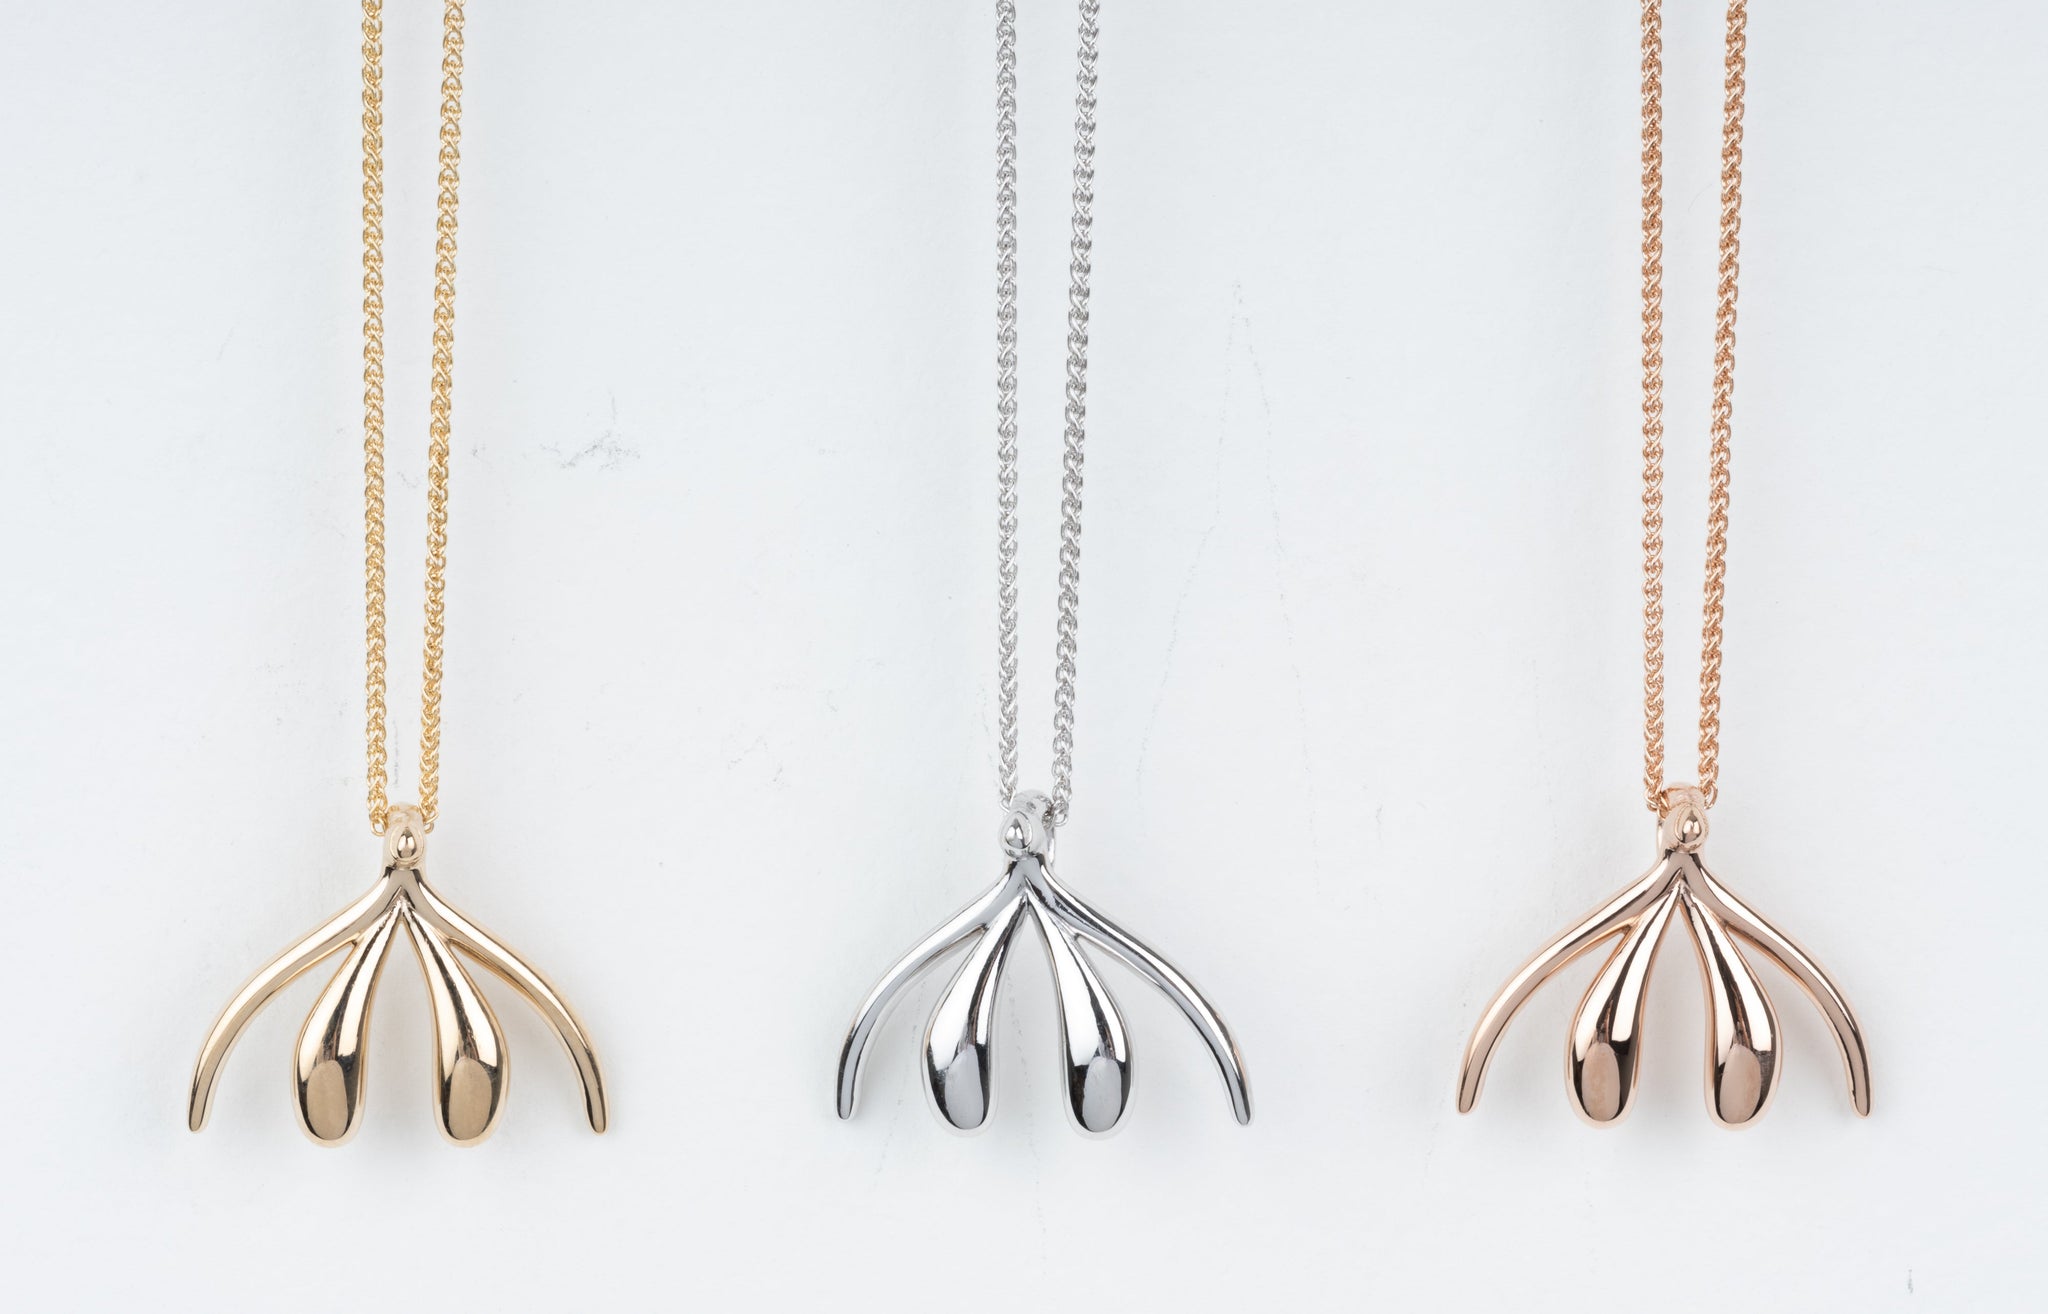 Left to right: 14k Solid Yellow, White and Rose Gold. Unconquorable Necklace (Heirloom) by Sophia Wallace